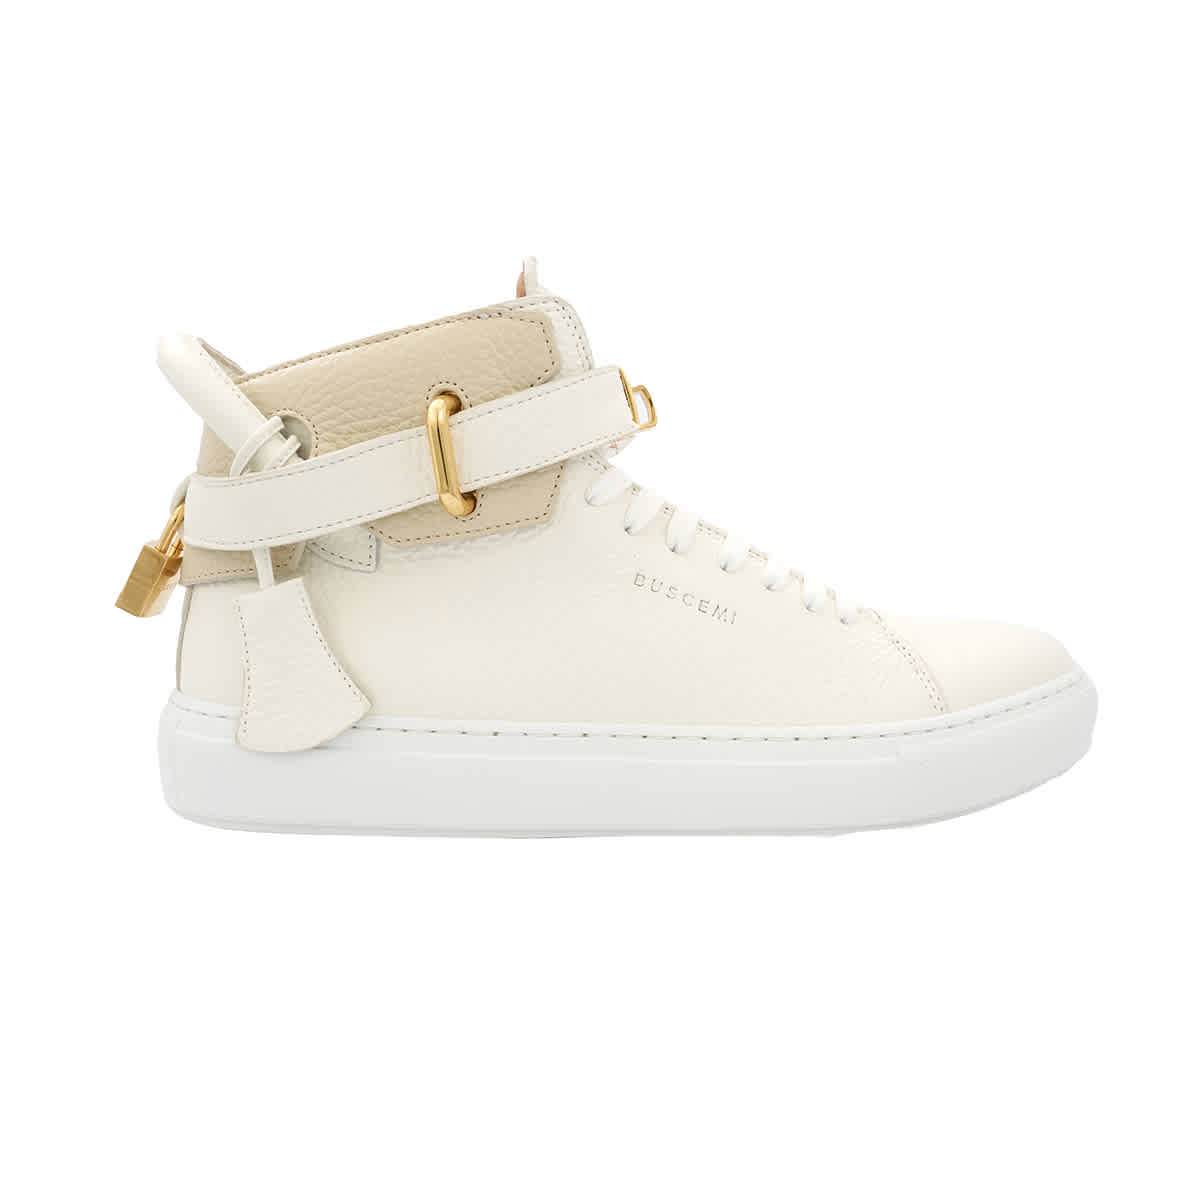 BUSCEMI BUSCEMI MENS BELTED HIGH-TOP SNEAKERS